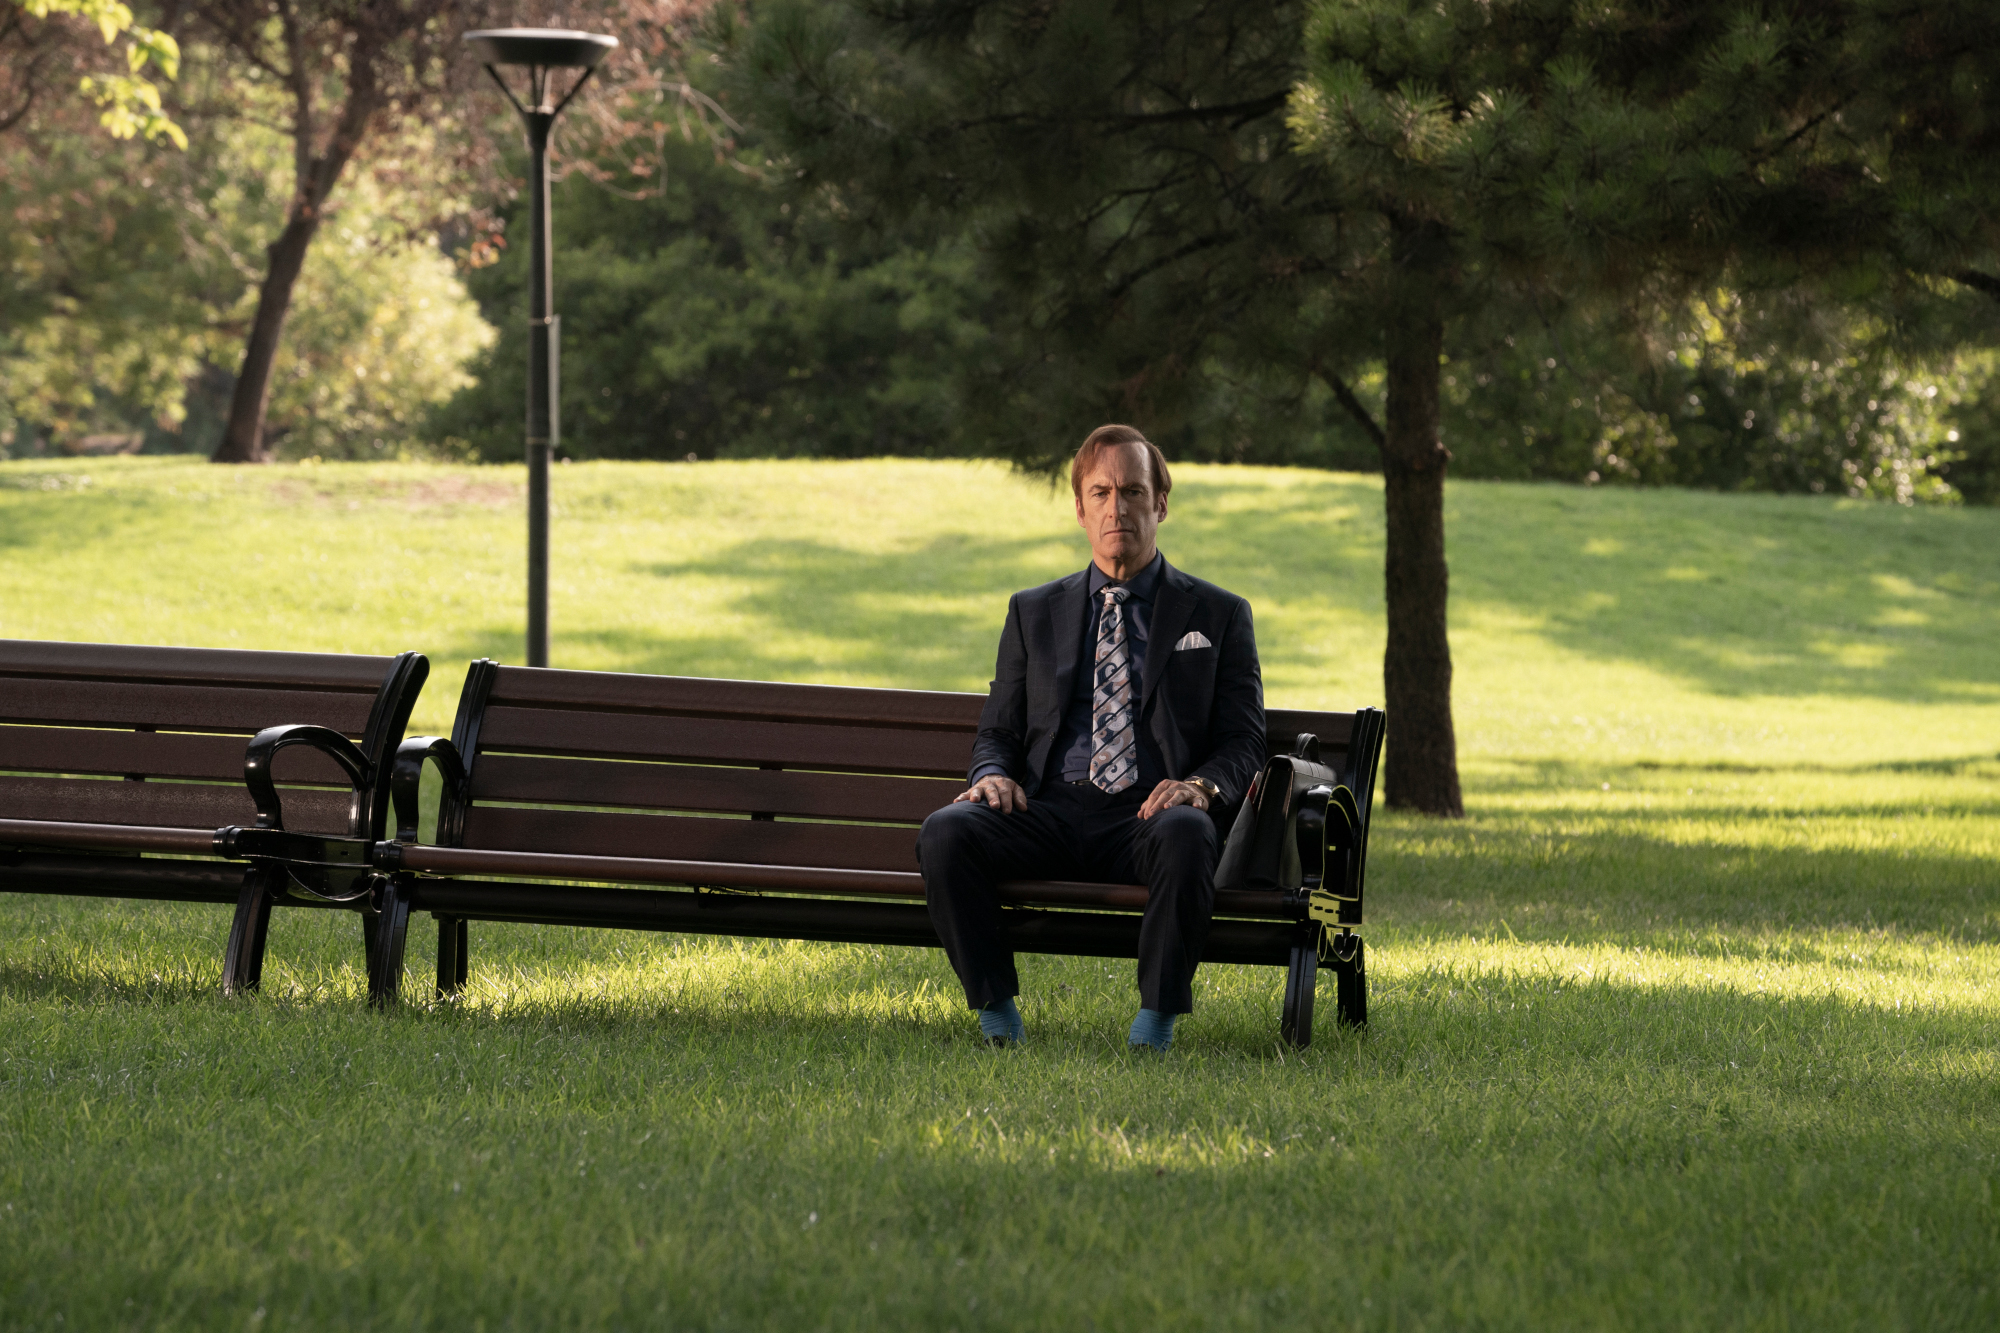 ‘Better Call Saul’: A Bob Odenkirk Interview Has Fans Predicting Prison for Saul Goodman